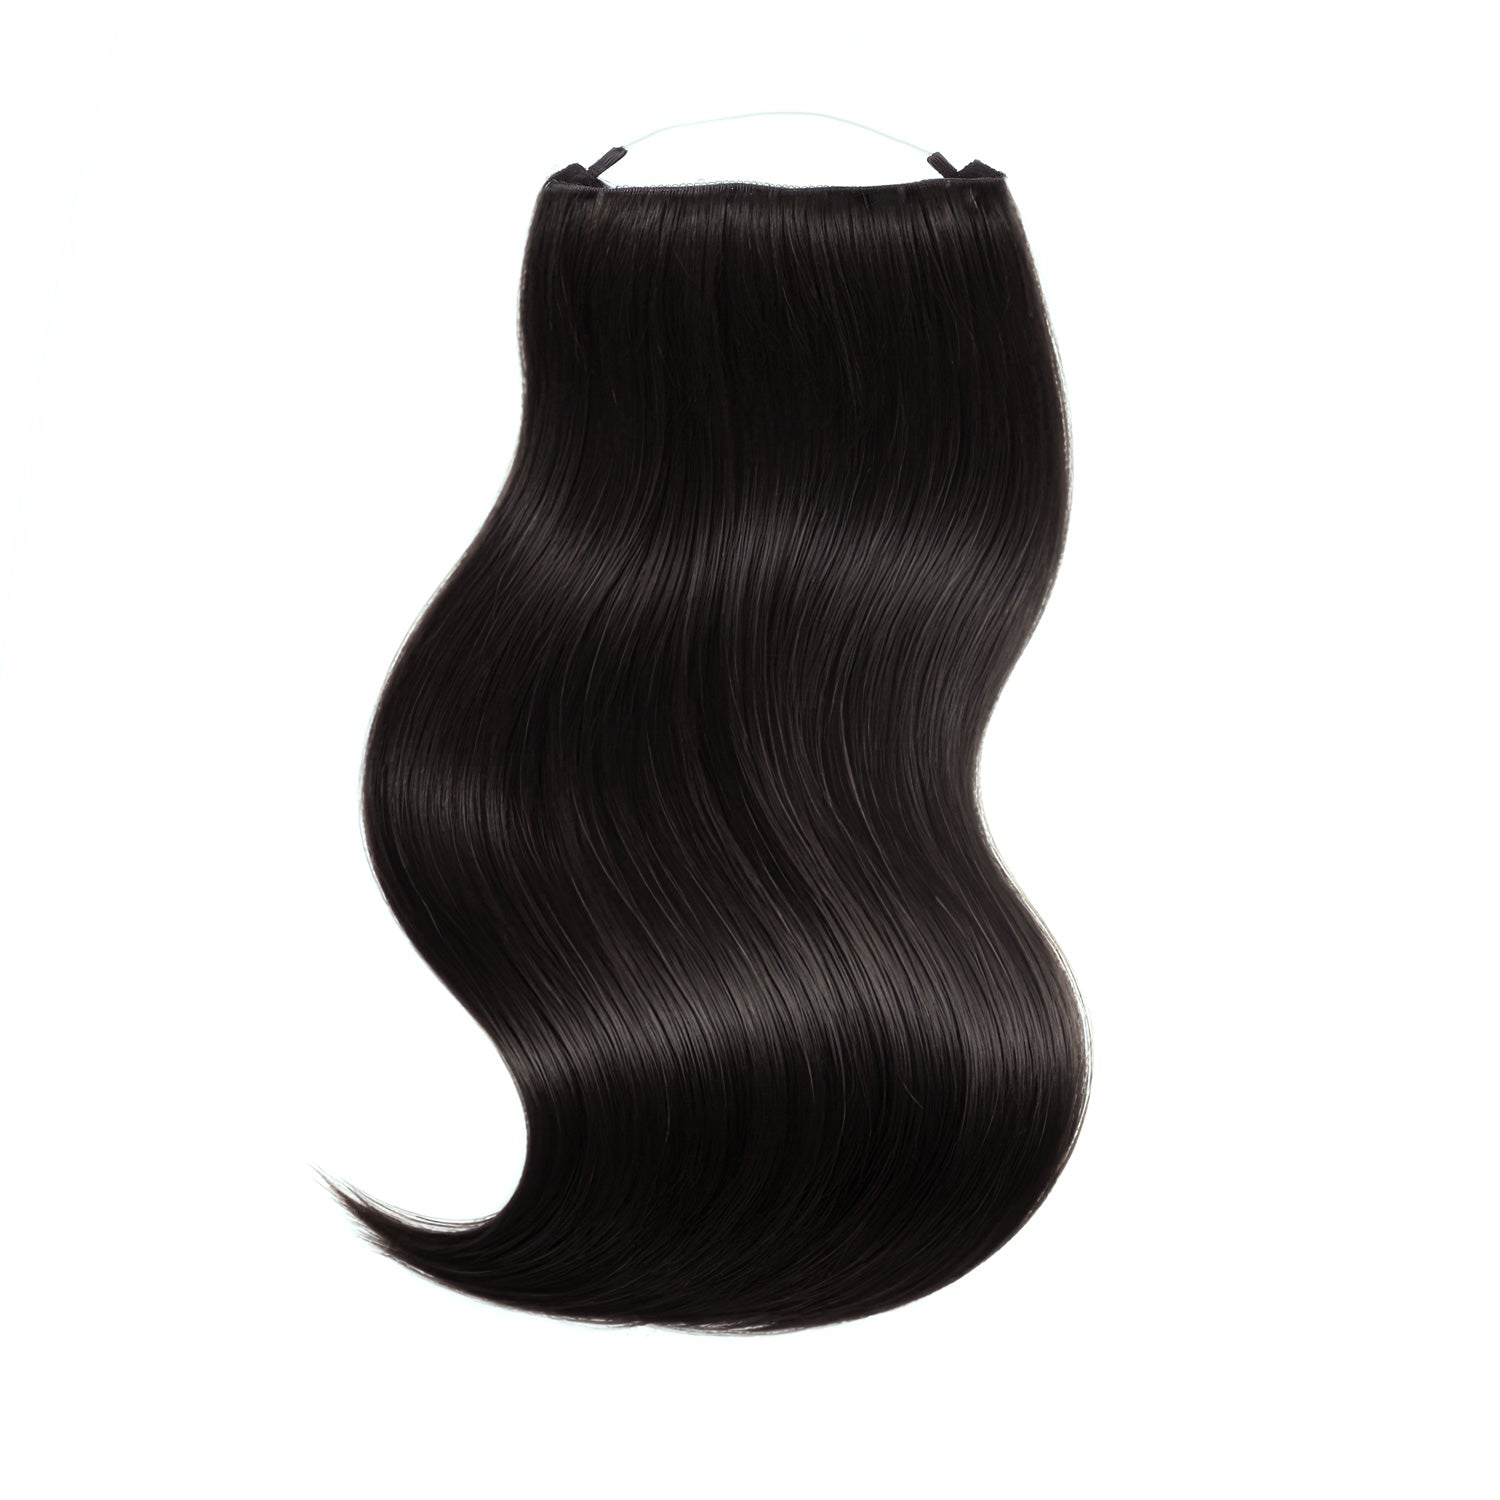 Halo Hair Extensions in natural black, styled in loose waves for a glamorous look.